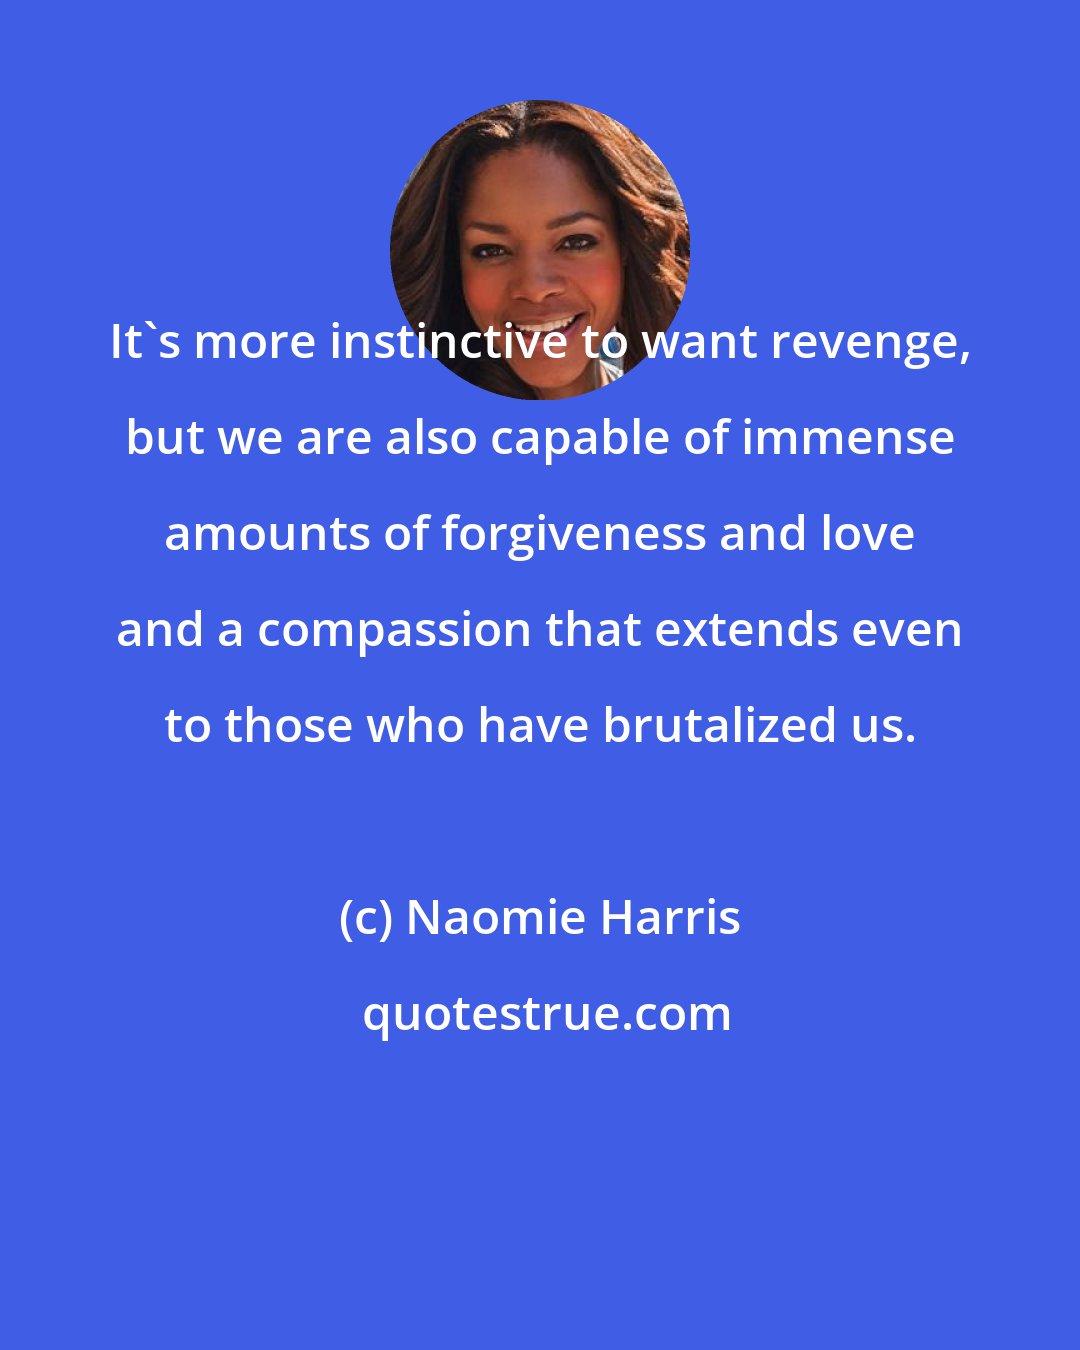 Naomie Harris: It's more instinctive to want revenge, but we are also capable of immense amounts of forgiveness and love and a compassion that extends even to those who have brutalized us.